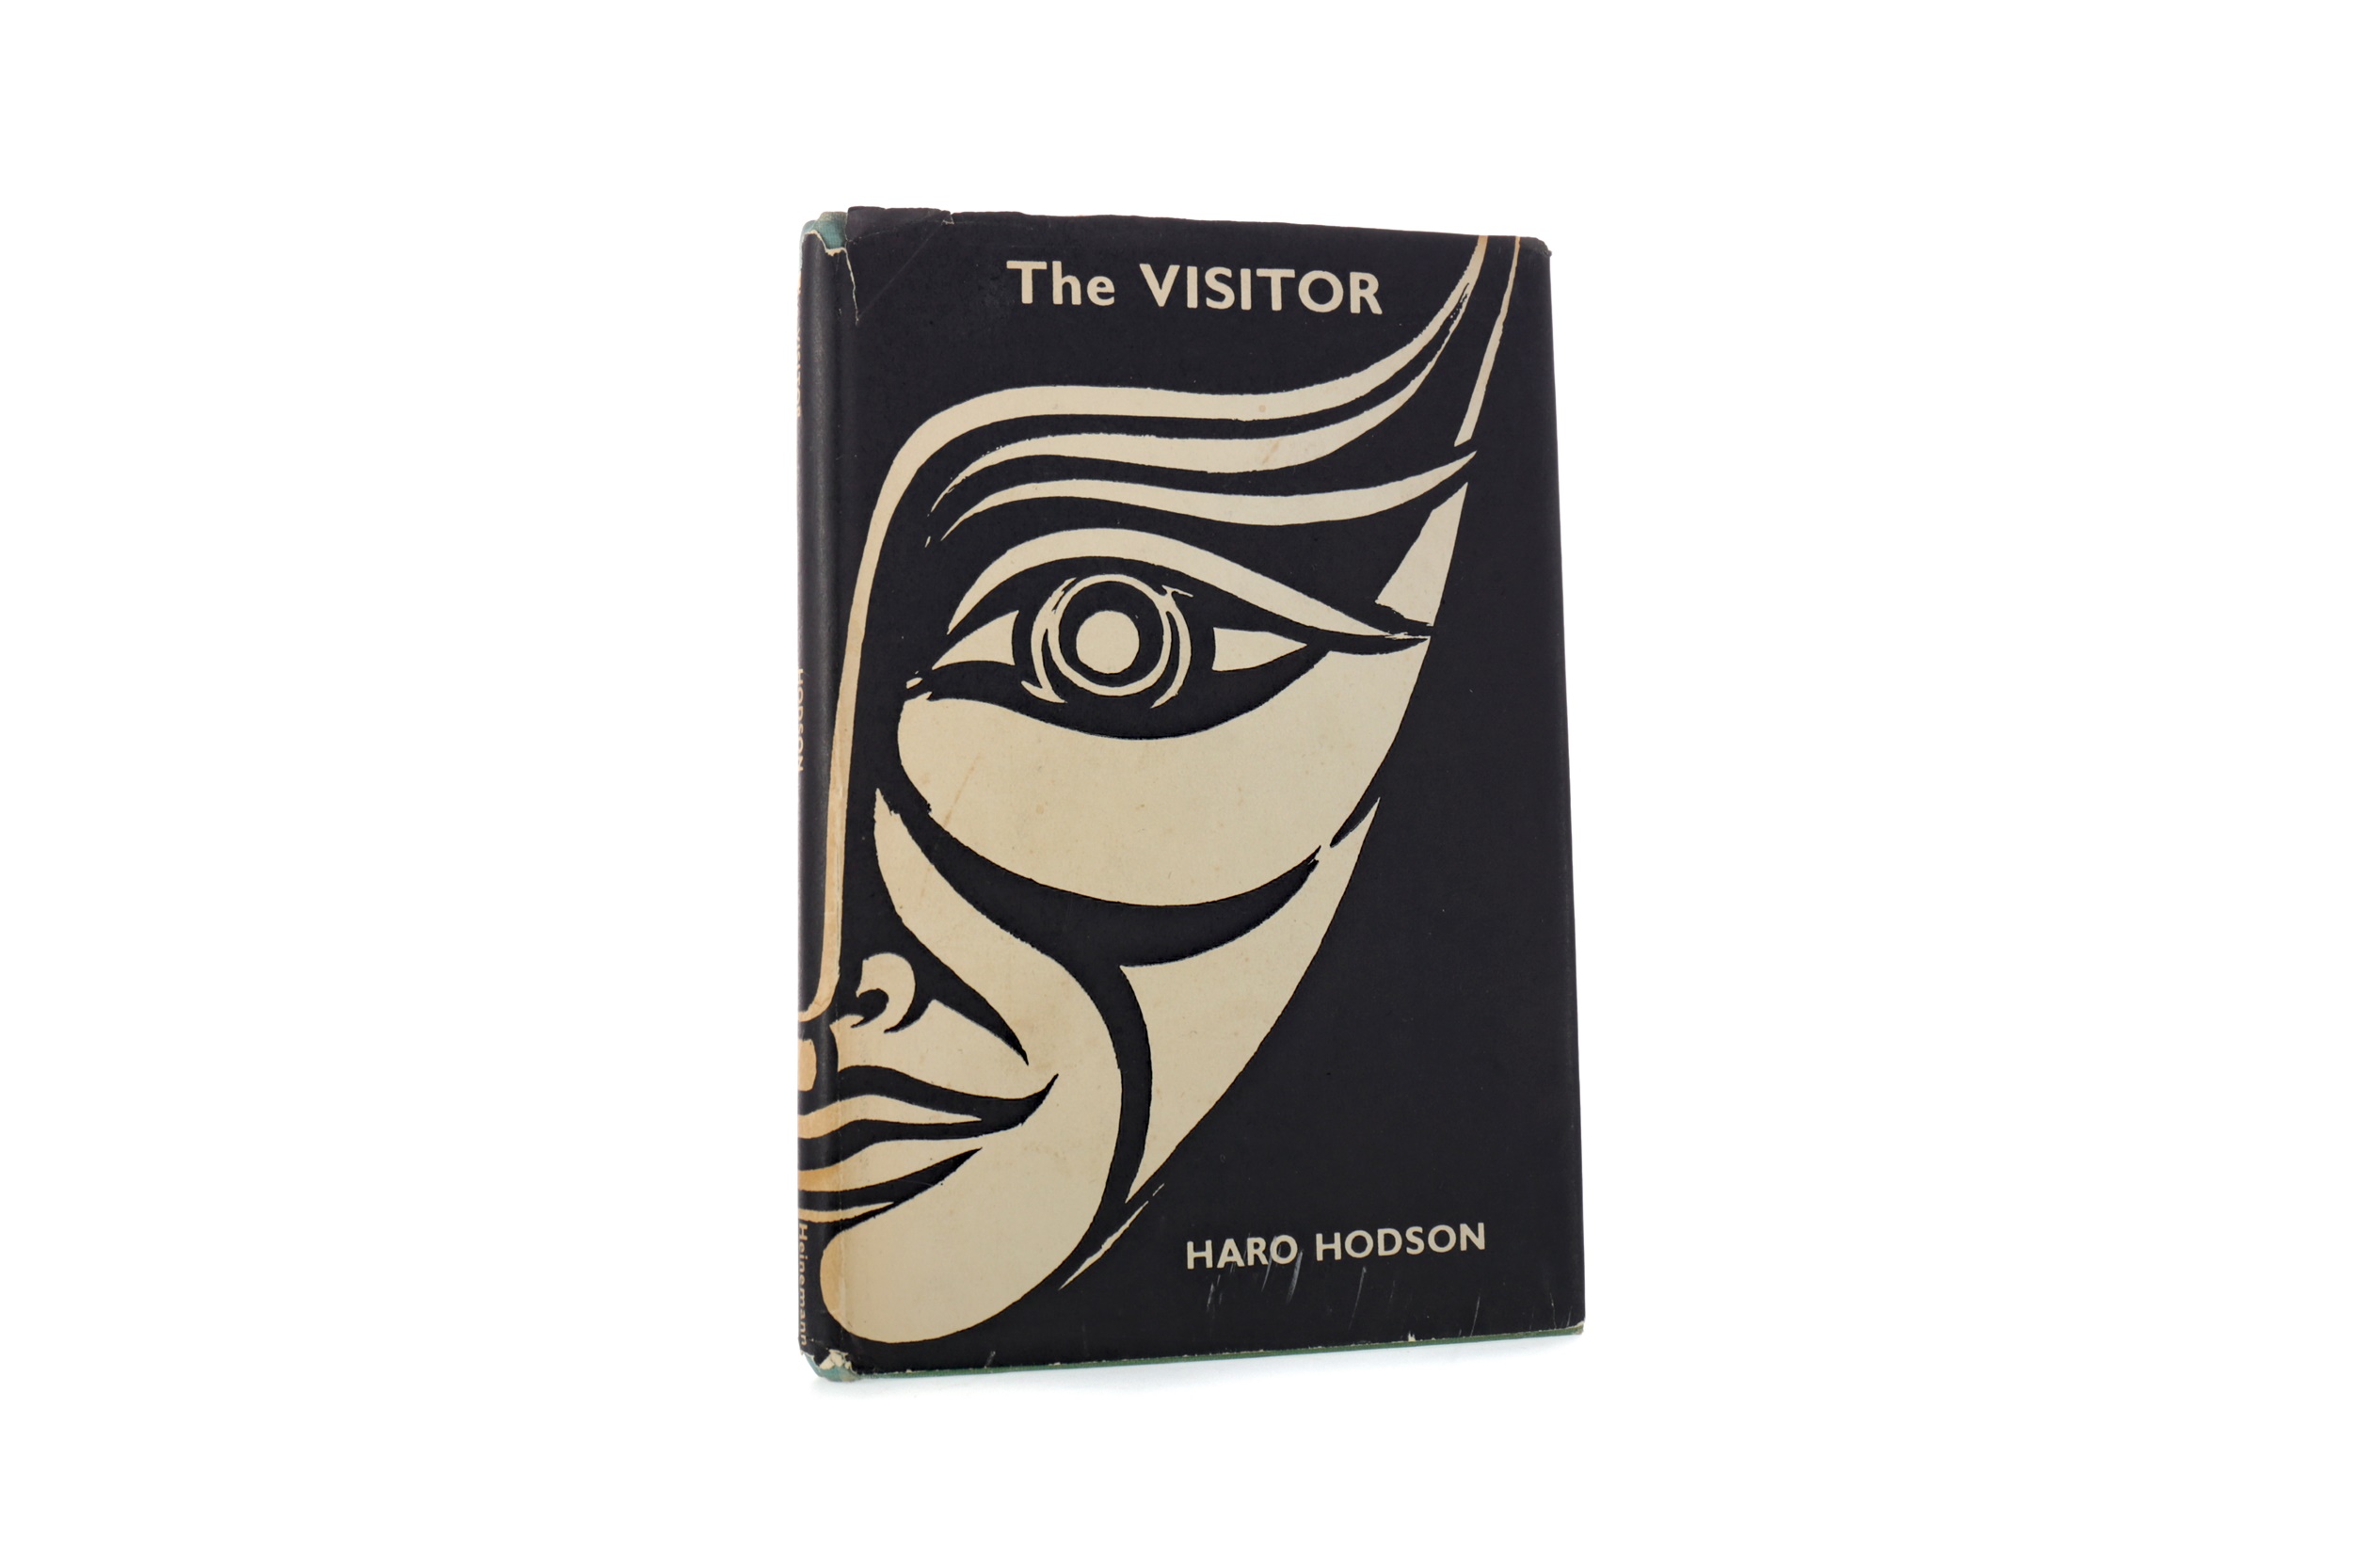 A SIGNED COPY OF THE VISITOR - POEMS BY HARO HODSON